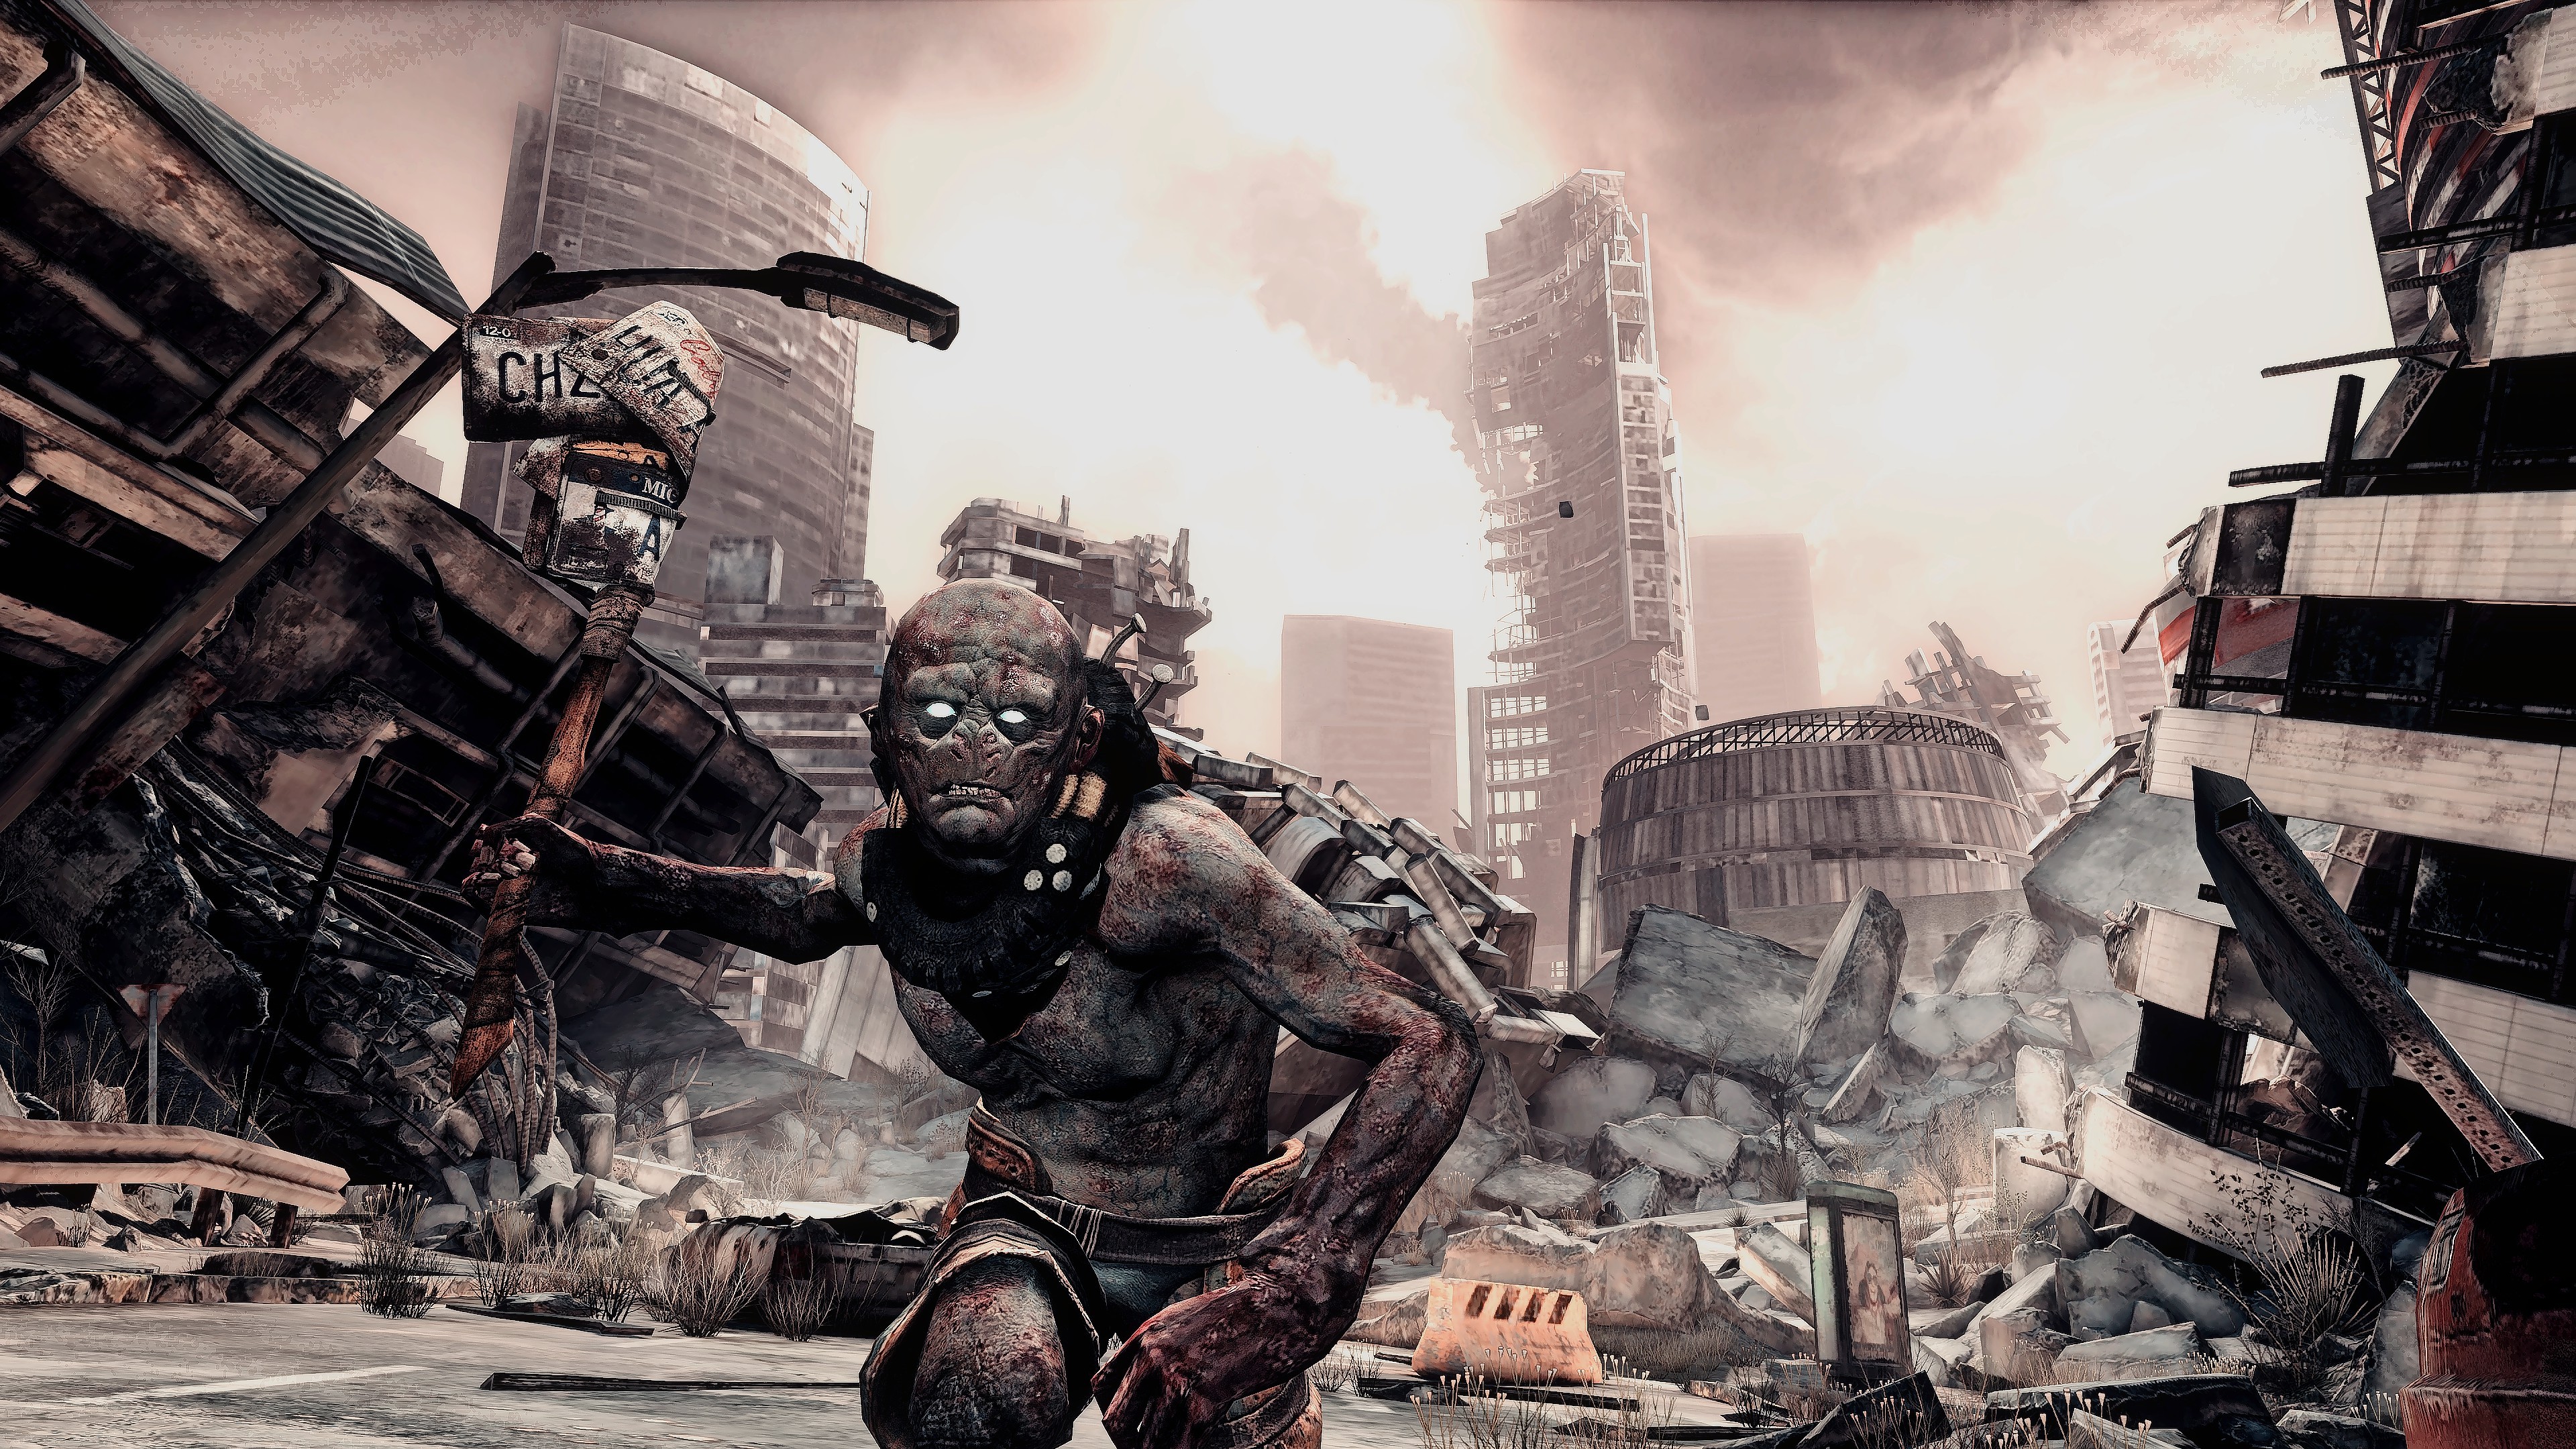 Rage Video Game Mutant Apocalyptic Video Games Attack 3840x2160